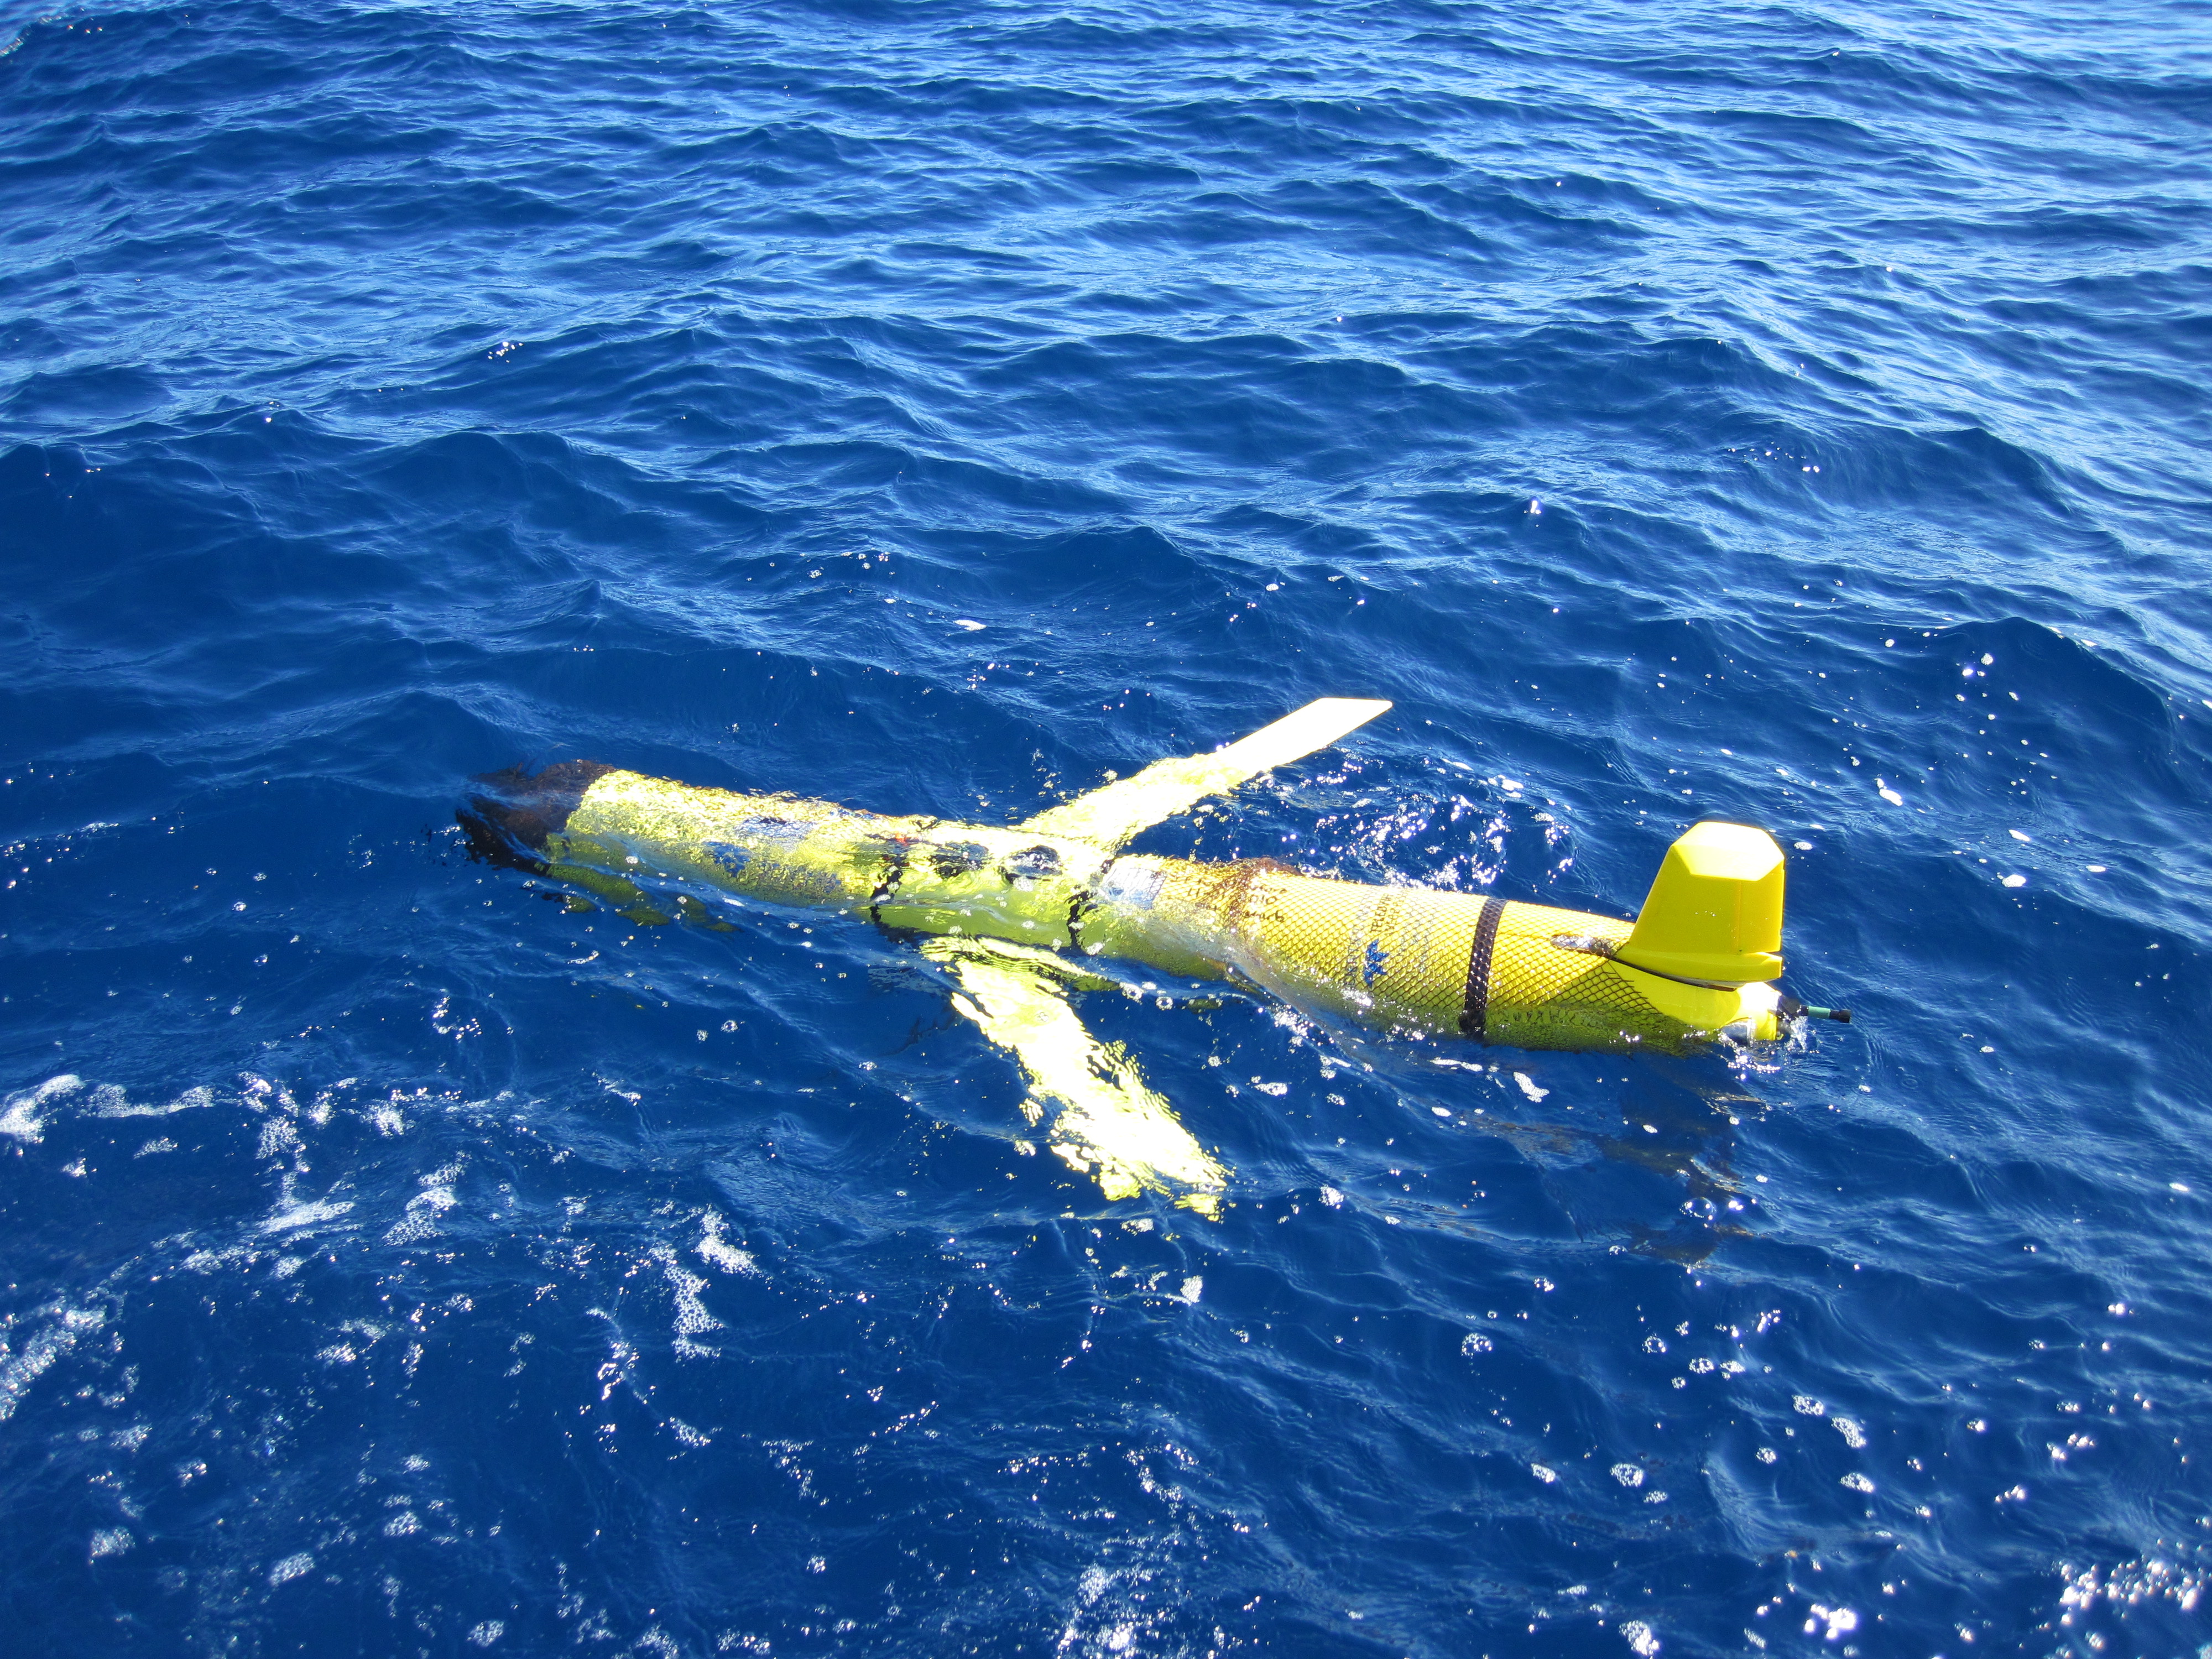 During months-long deployments, gliders gather biological, physical, and chemical data on things like fisheries, currents, and nutrients in the ocean.